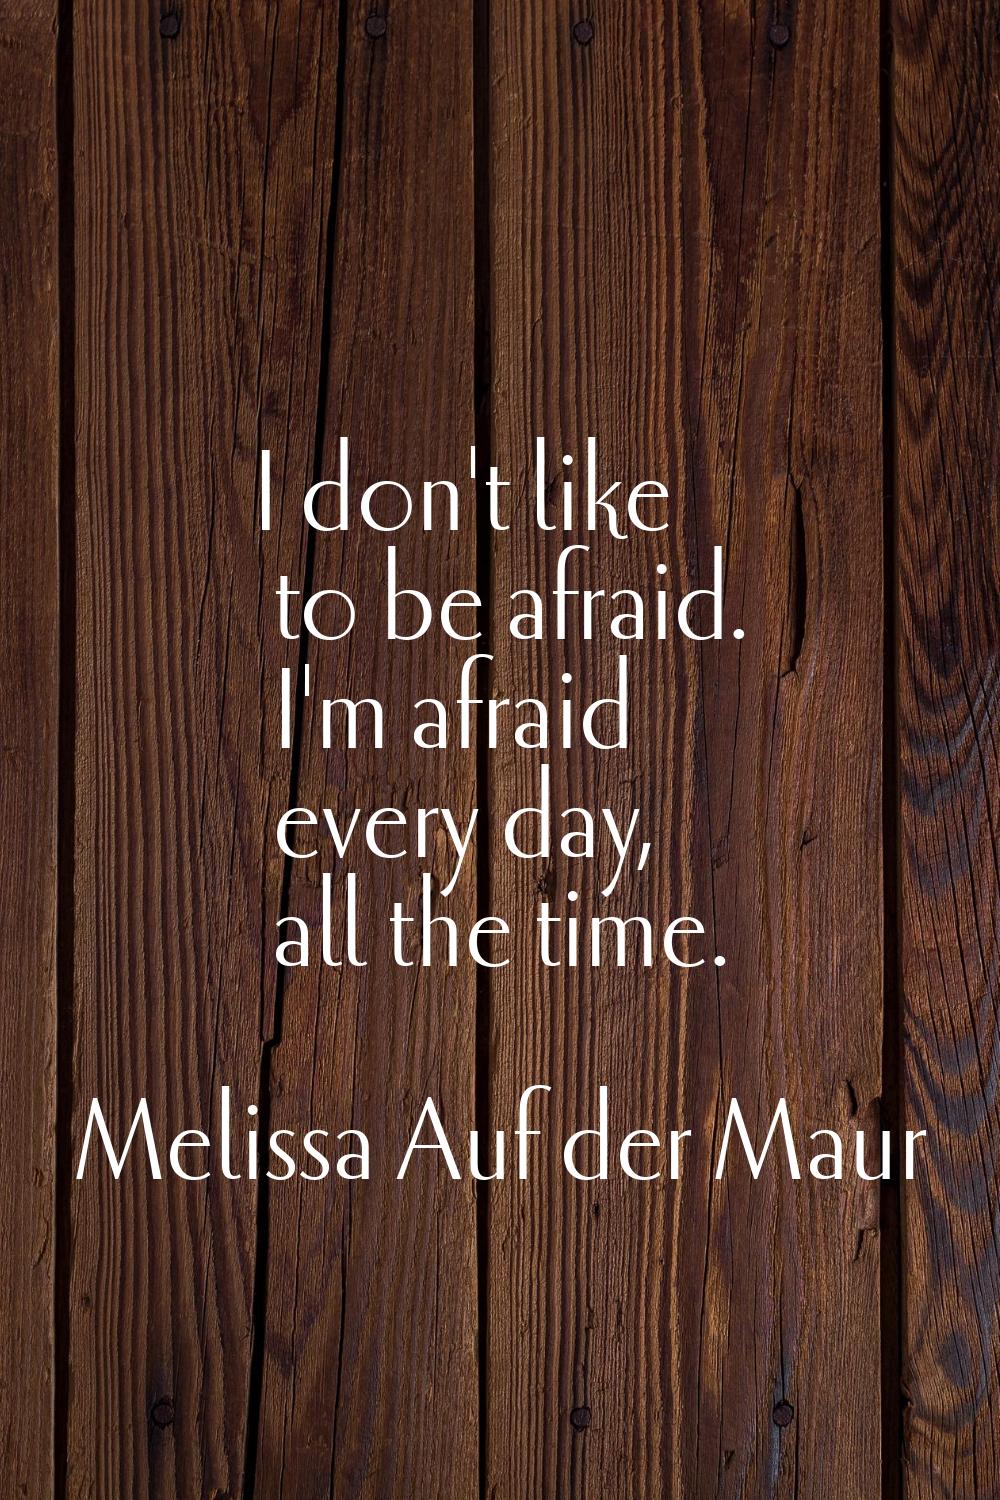 I don't like to be afraid. I'm afraid every day, all the time.